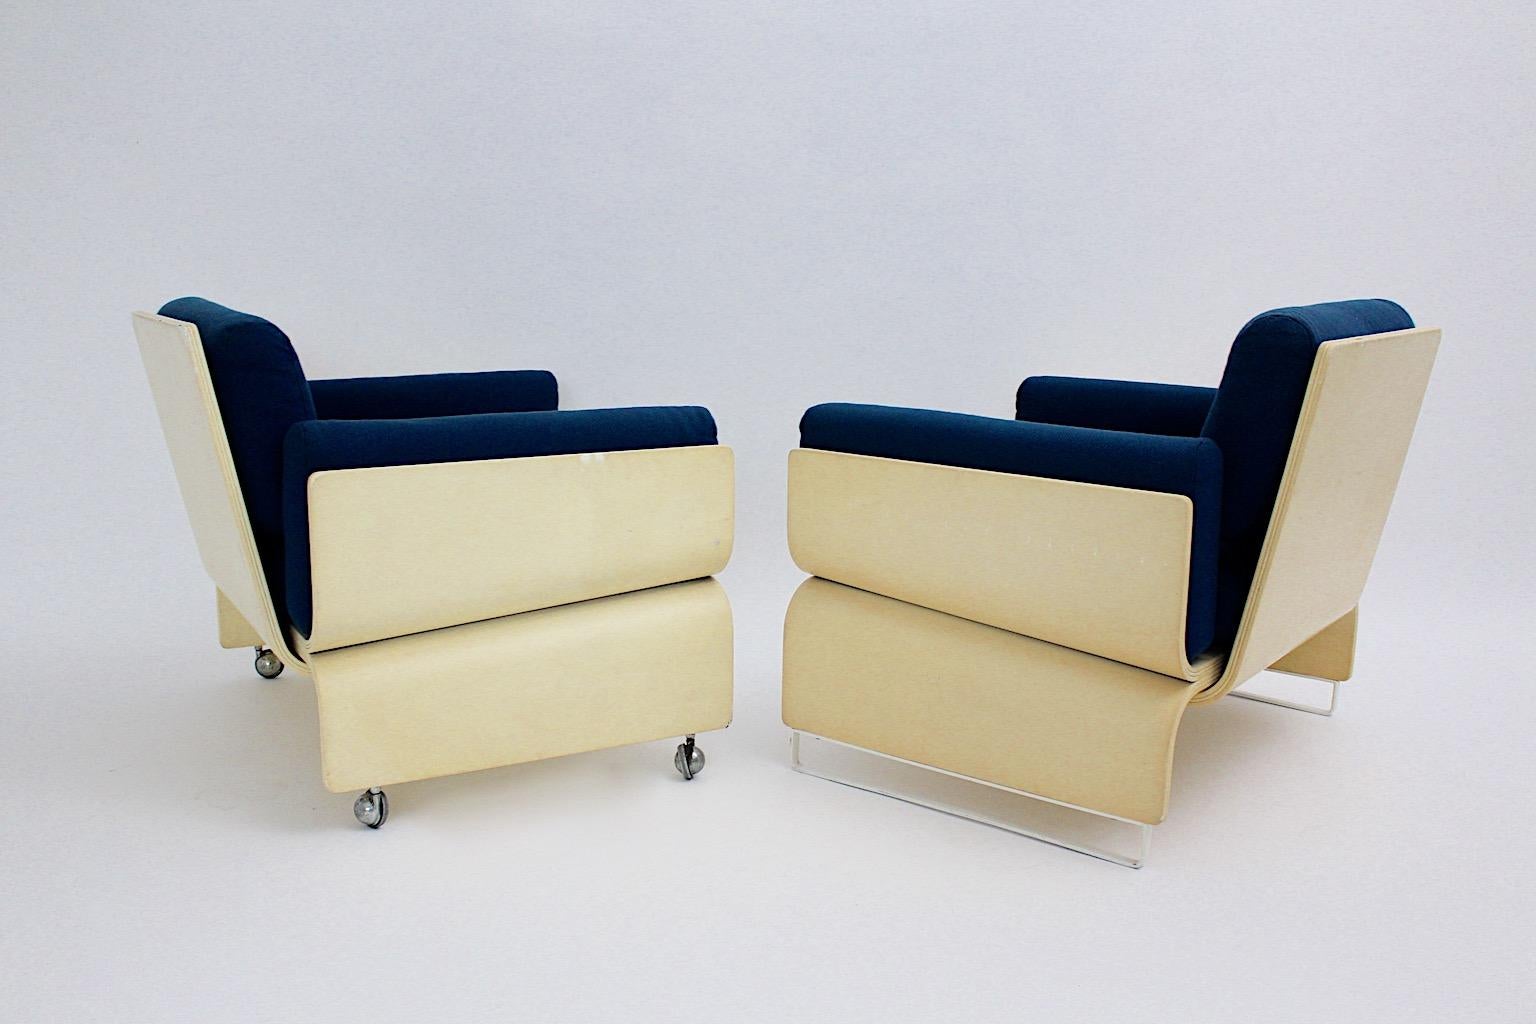 Space Age Vintage White Blue Lounge Chairs, 1960s For Sale 2